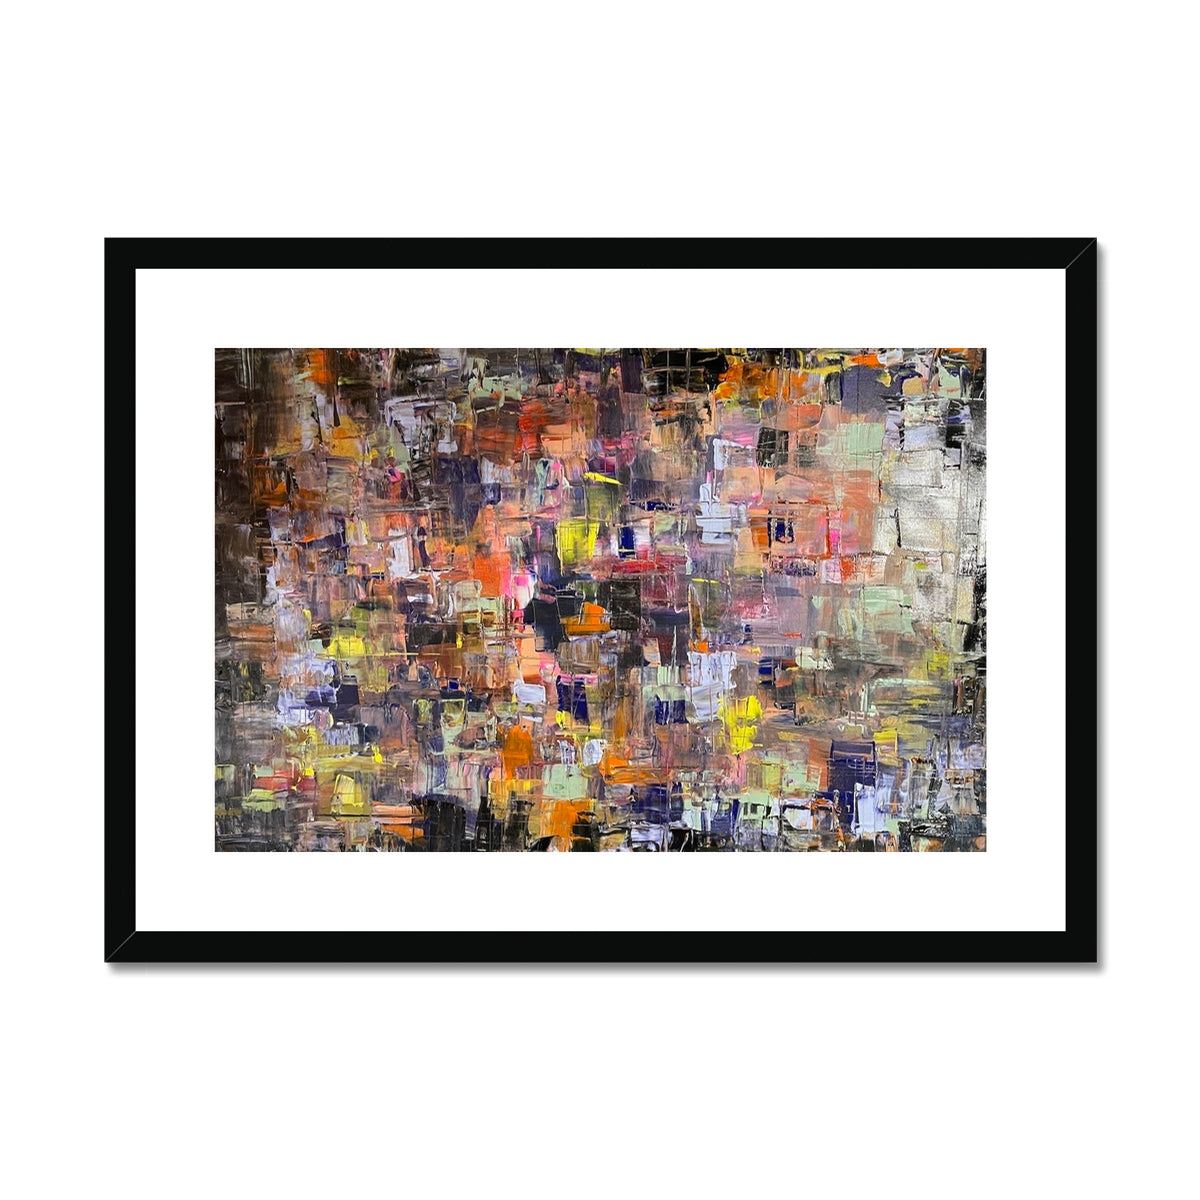 Never Enough Abstract Painting | Framed & Mounted Prints From Scotland-Framed & Mounted Prints-Abstract & Impressionistic Art Gallery-A2 Landscape-Black Frame-Paintings, Prints, Homeware, Art Gifts From Scotland By Scottish Artist Kevin Hunter